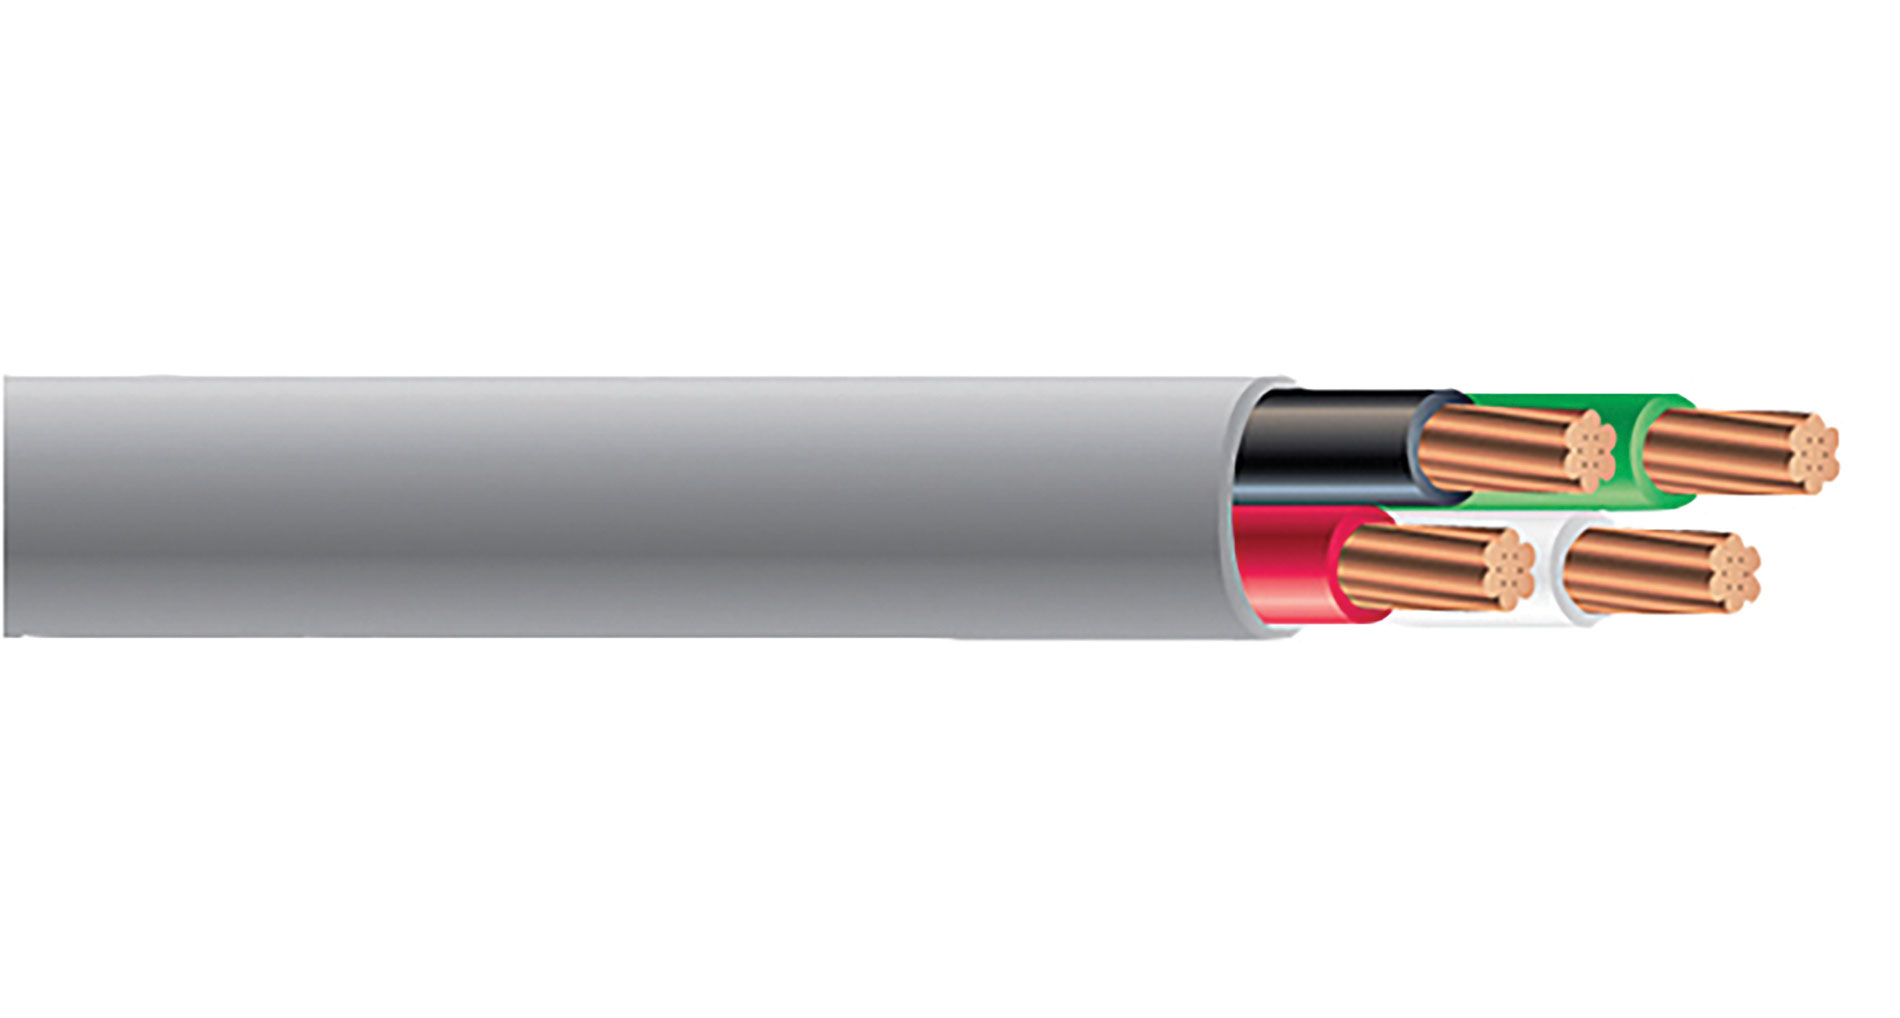 Illustration of multi-colored cables. Image by Southwire.